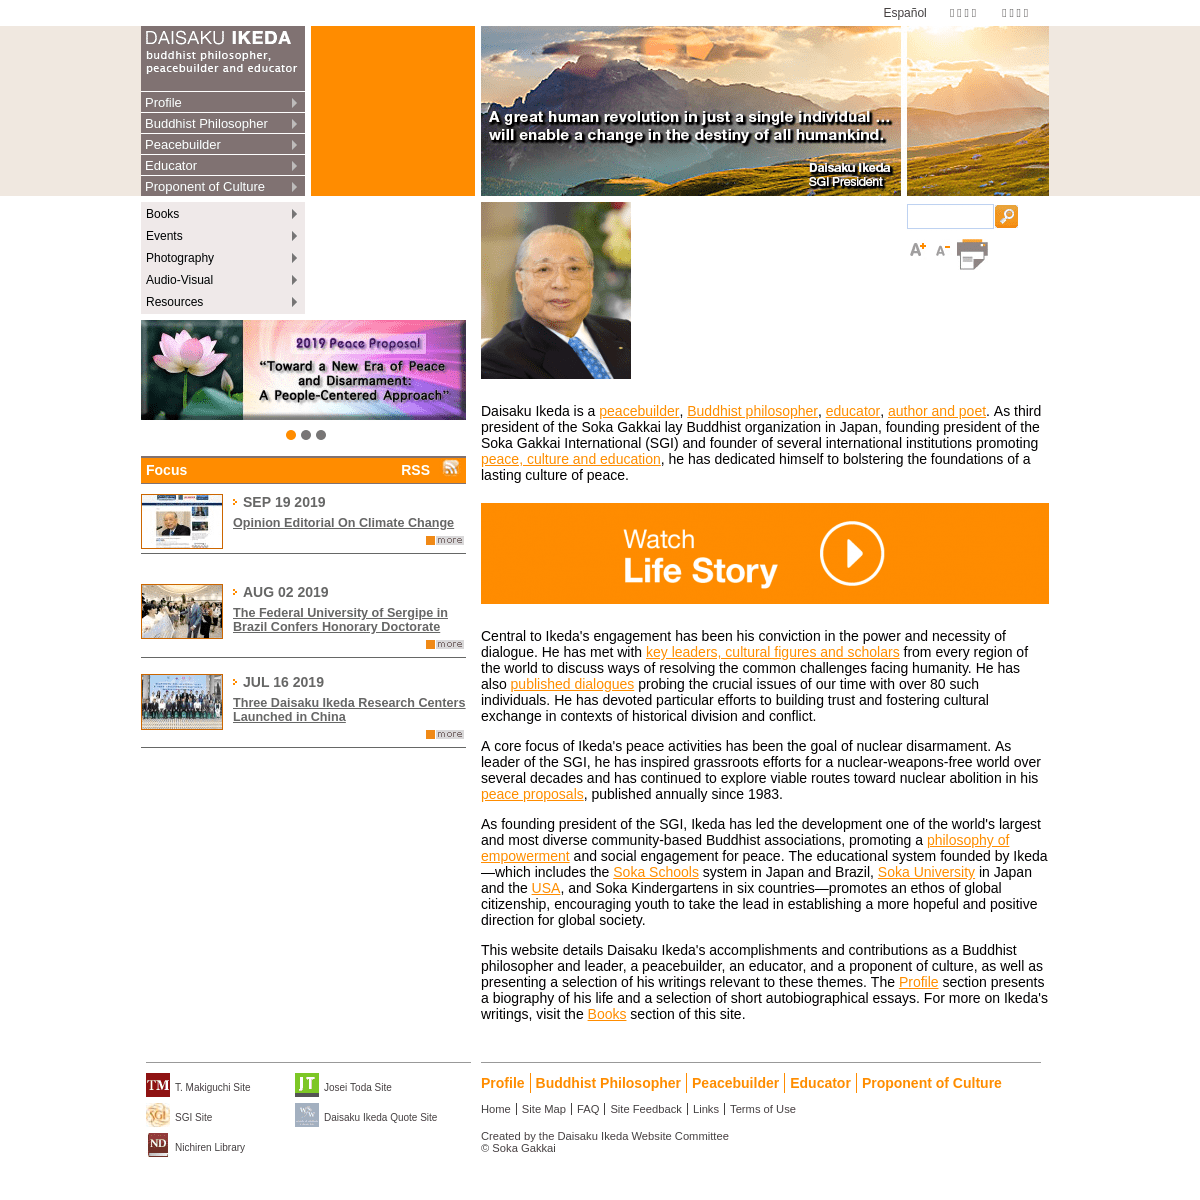 A complete backup of daisakuikeda.org